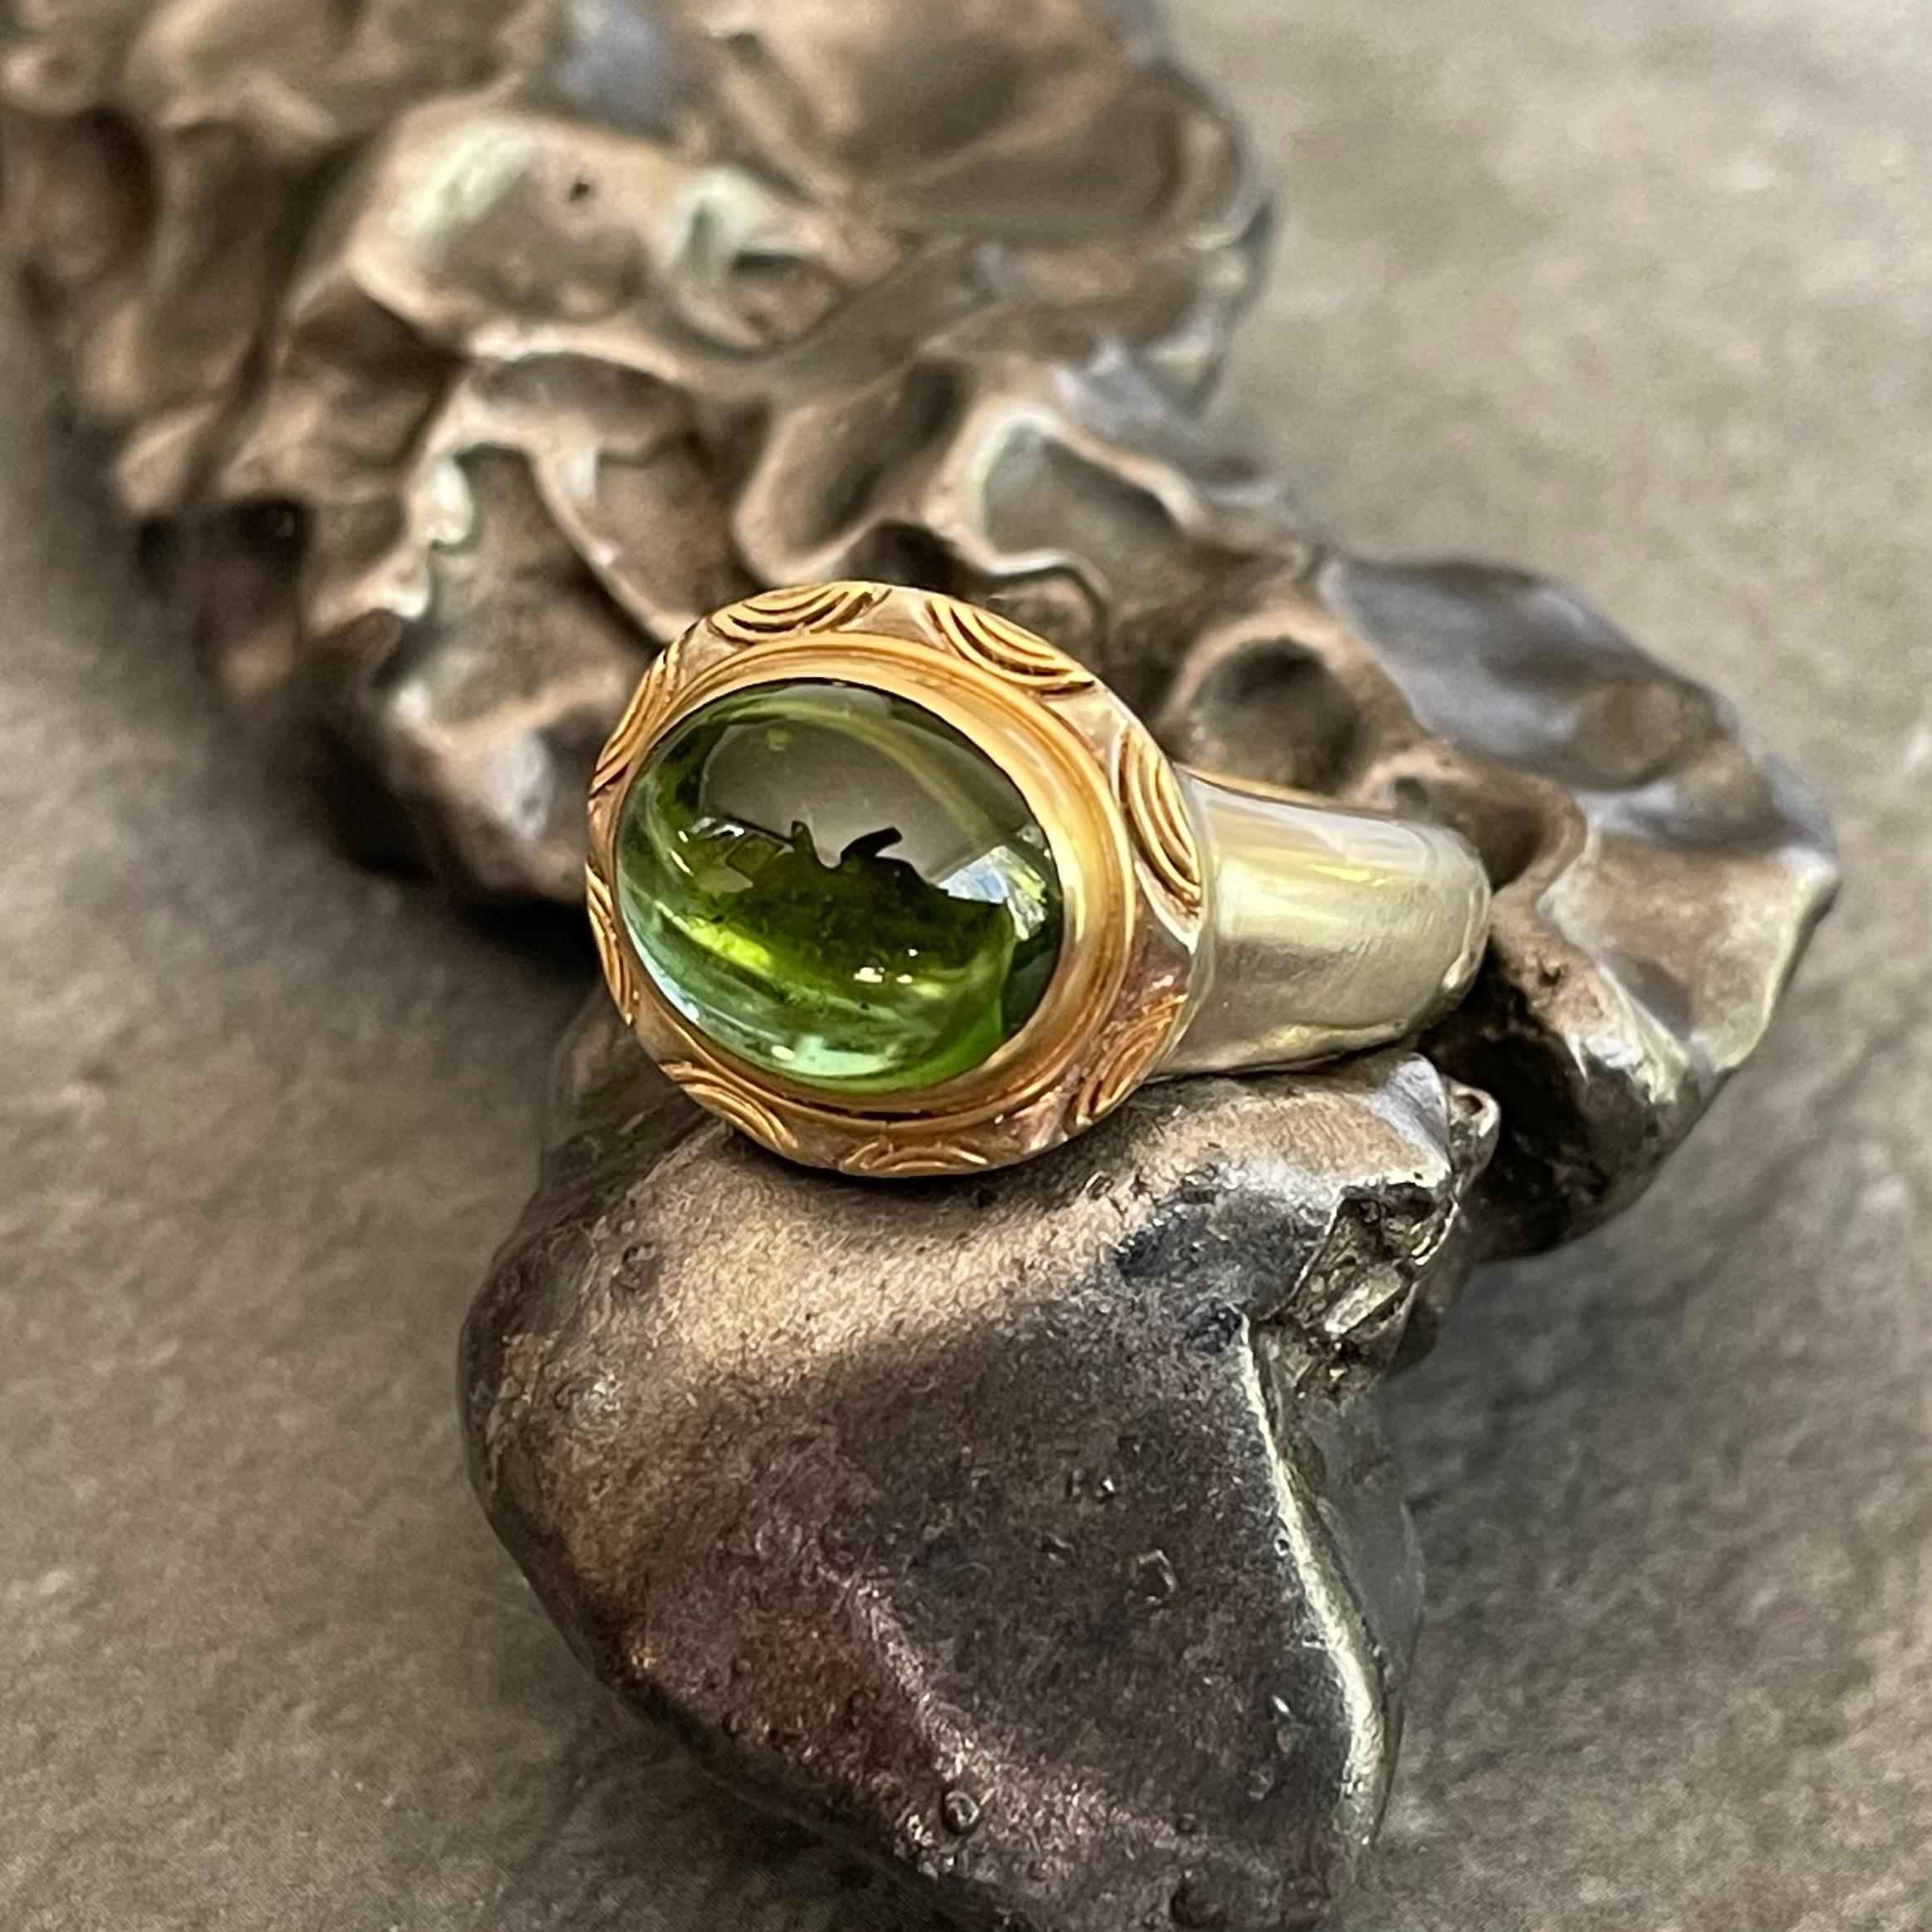 A beautiful 10 x 12 mm clear Brazilian green tourmaline cabochon  is held in an 18K yellow gold bezel with double wire accents surrounding atop a matte-finish 14K white gold tapered shank in this intriguing design.  This ring is currently sized 6.5